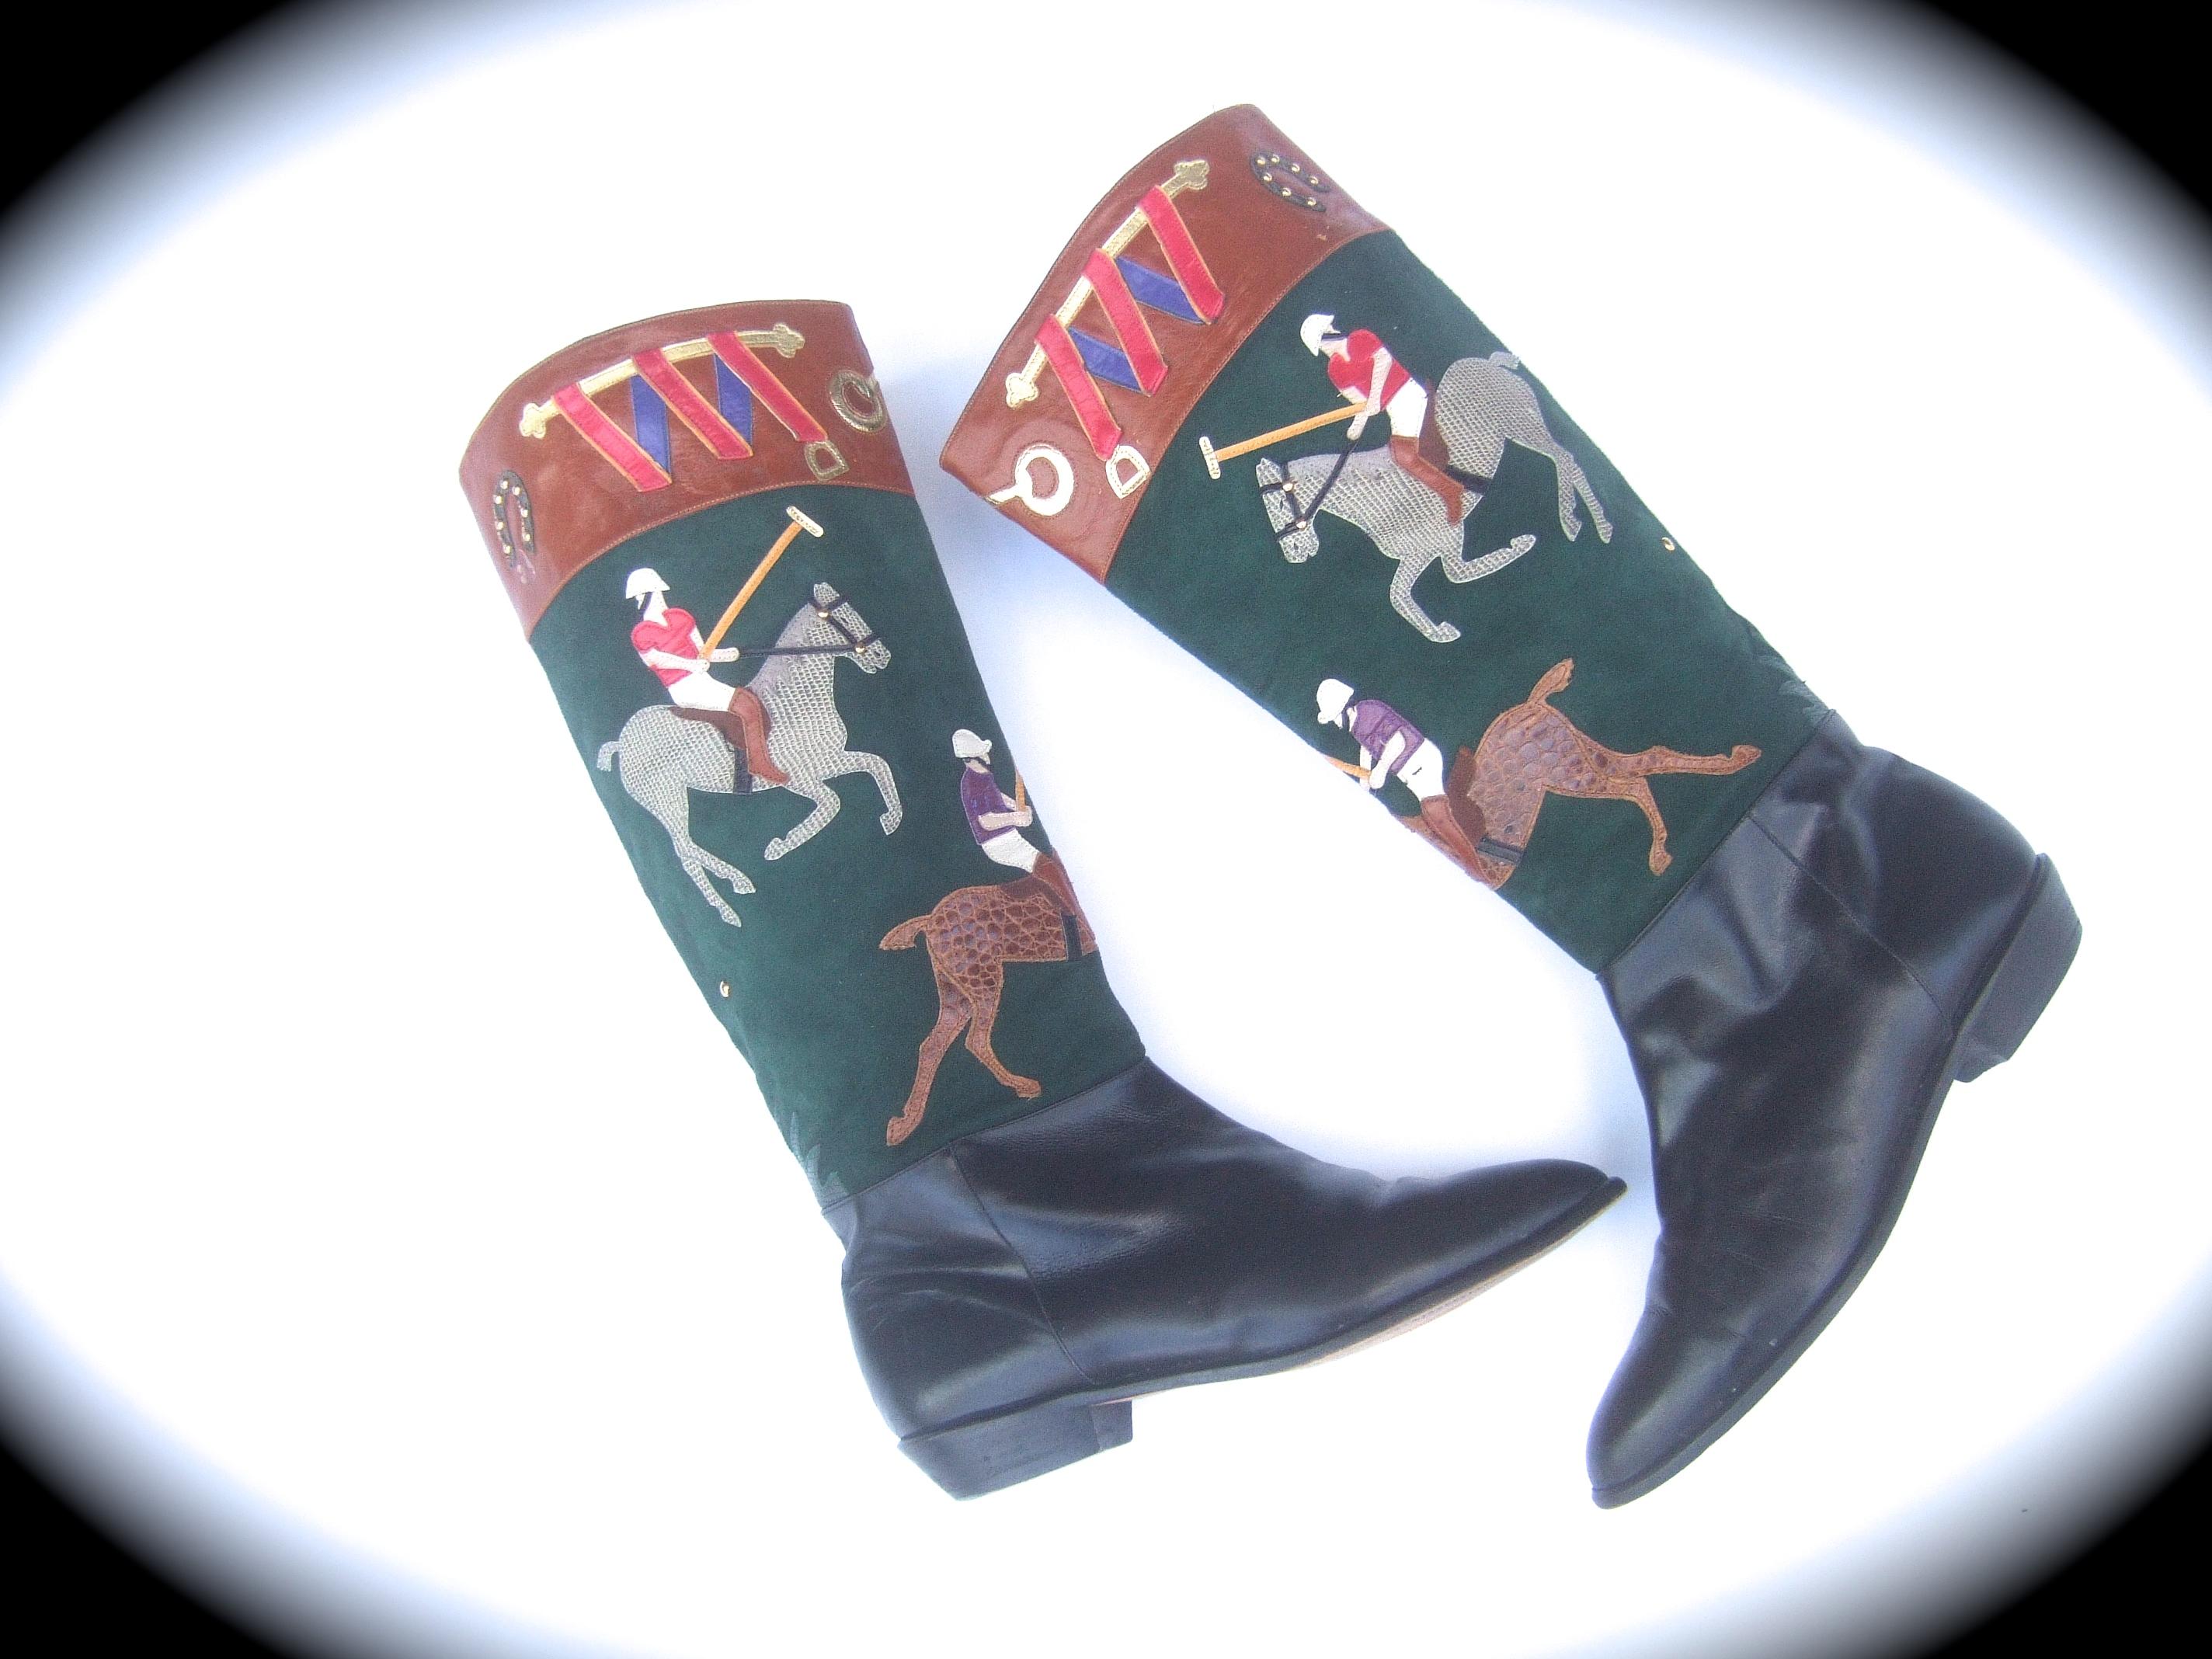 Extremely rare women's equestrian polo player themed suede & leather boots US Size 8 M

The stylish equestrian style boots are designed with a pair of leather applique male polo players mounted on their steeds Set against a green suede background.